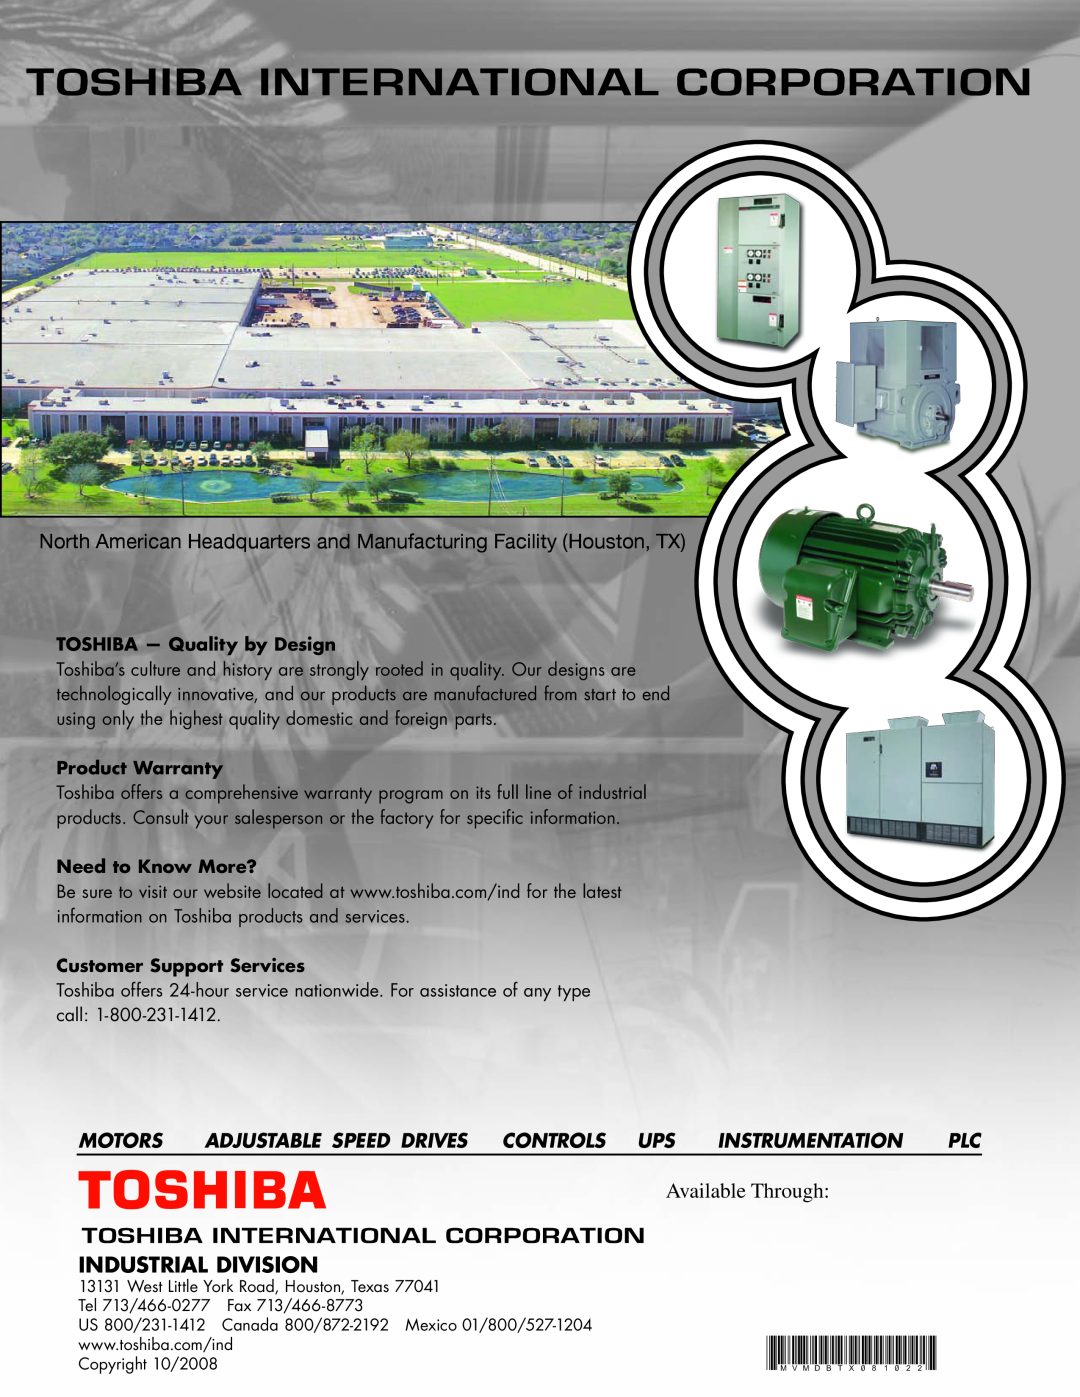 Toshiba Available Through, Industrial Division, North American Headquarters and Manufacturing Facility Houston, TX 